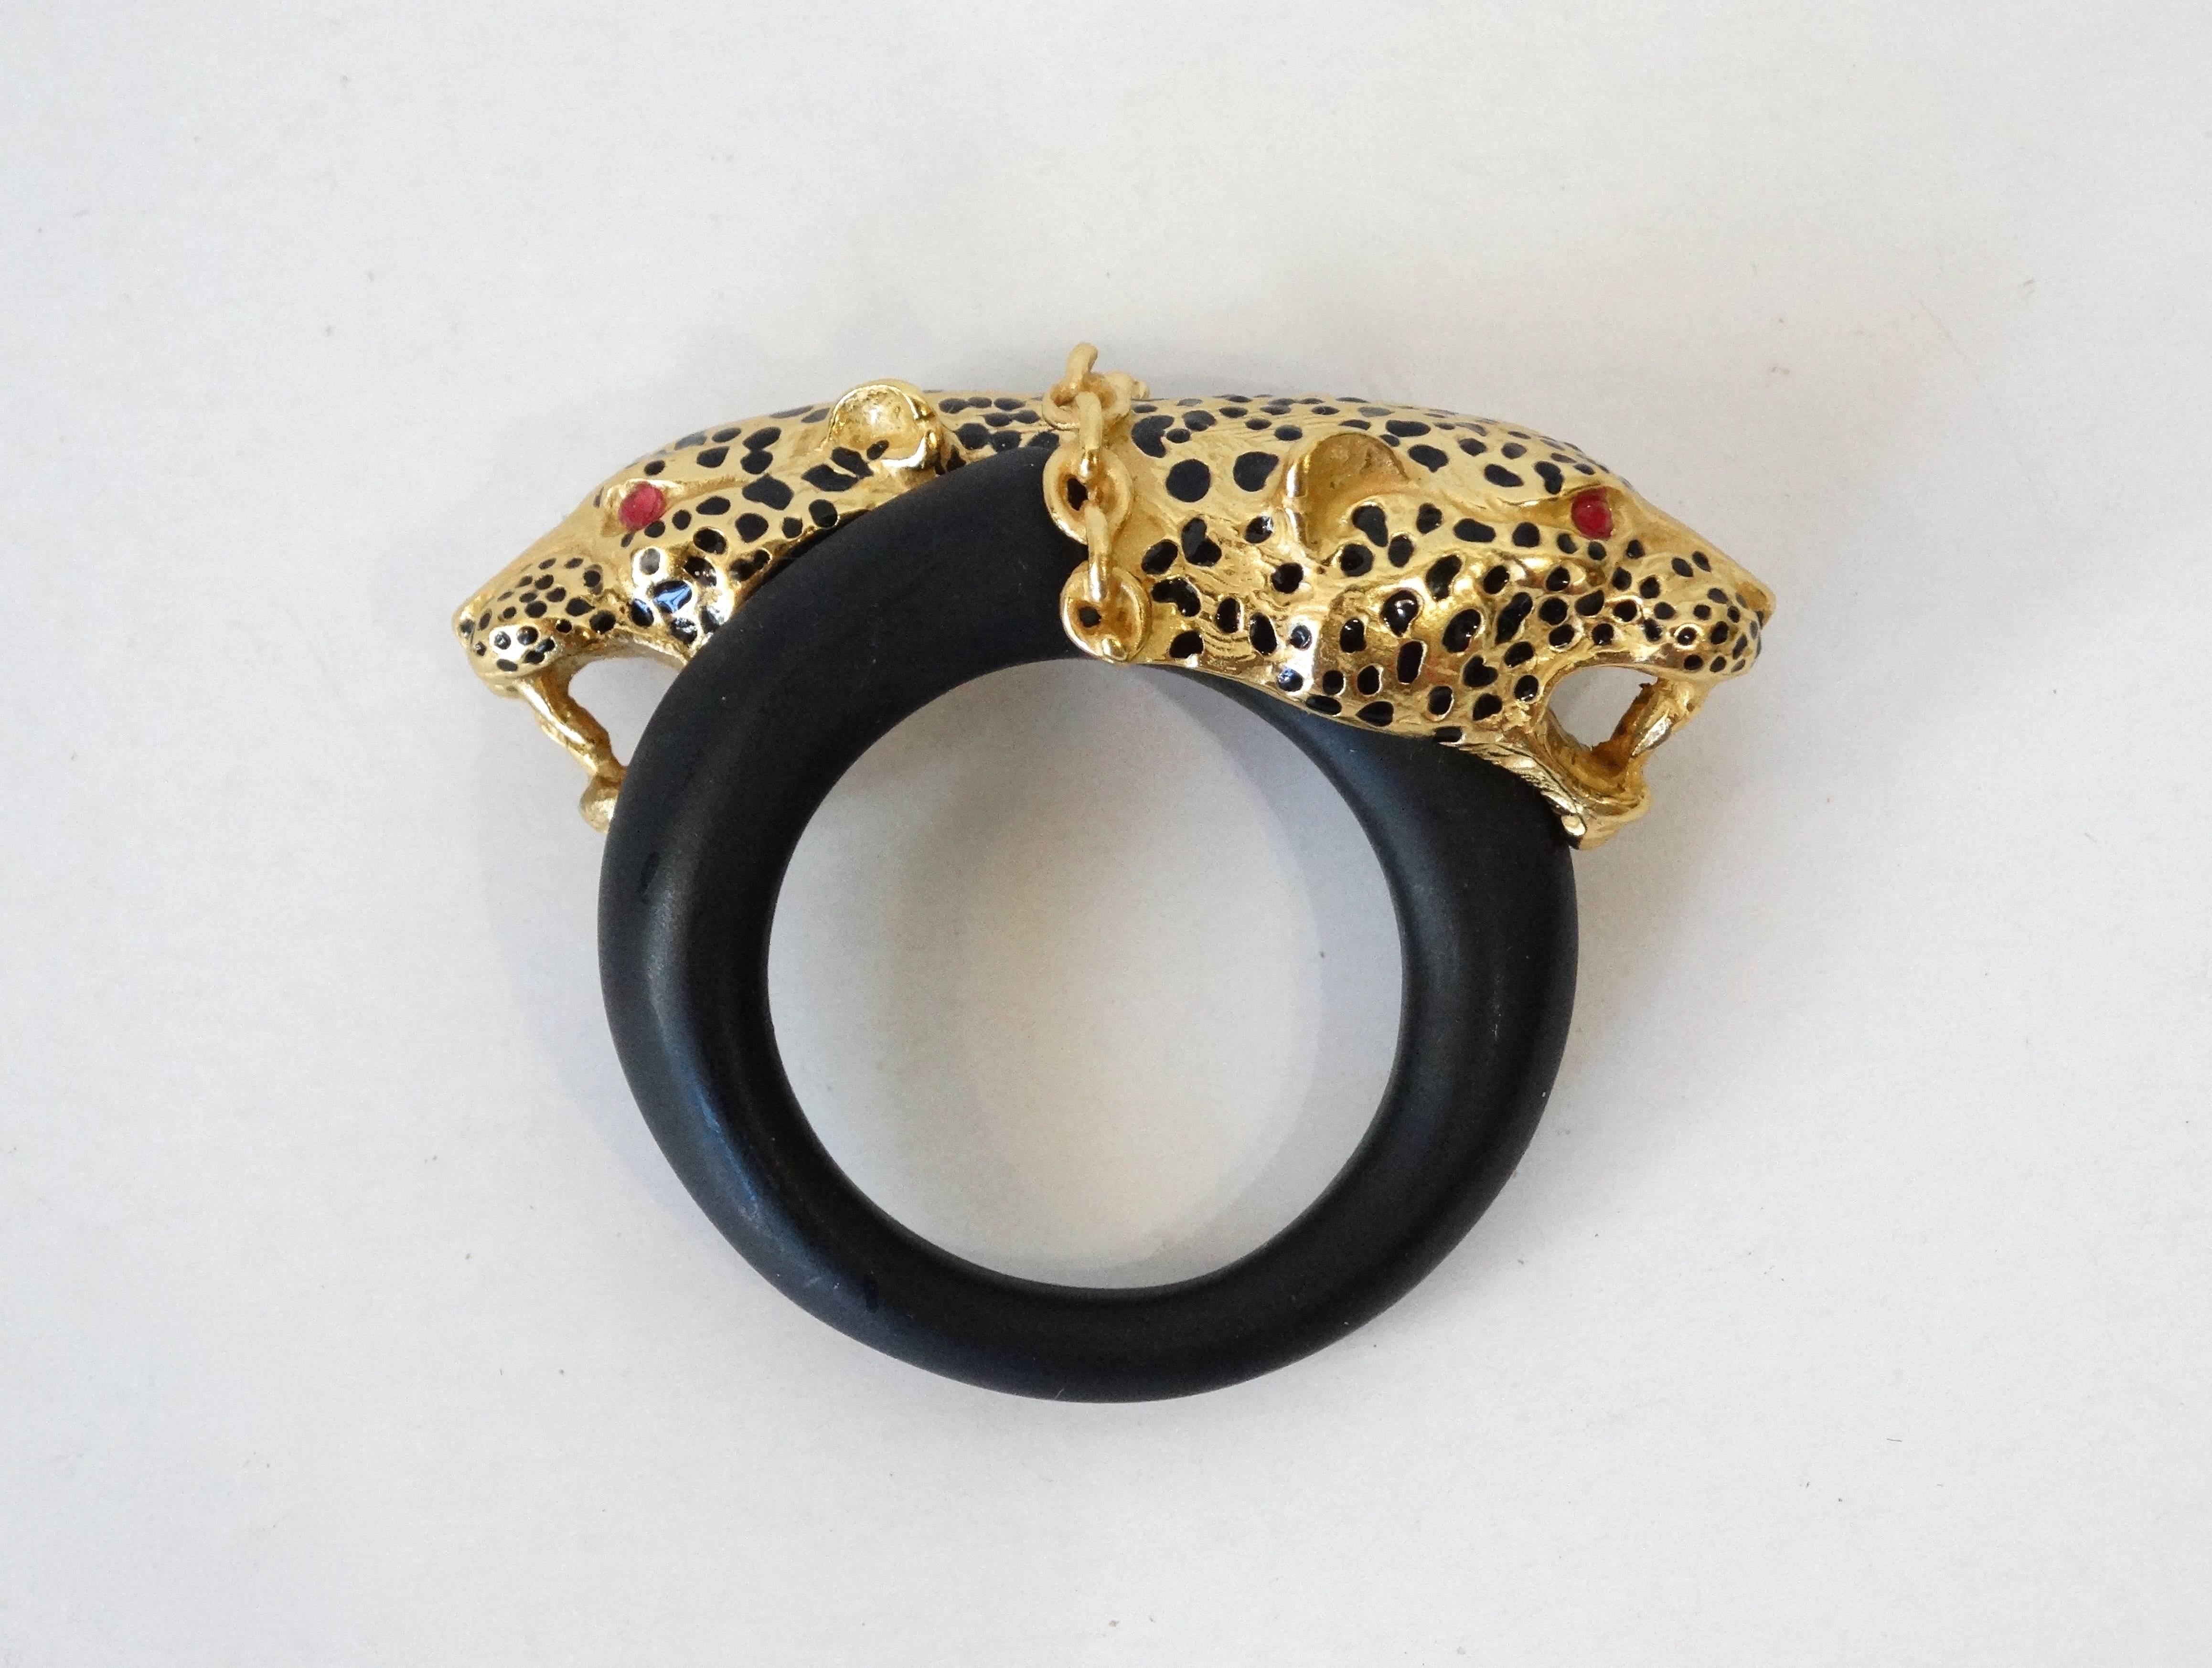 1980's Gorgeous Franklin Mint,Panther Brooch plated in 22kt gold with ruby rhinestone eyes. The panther heads measure 2 inch across the top and about 3/4 inch wide. The brooch is about 1 inch wide and thick. Panther head has black enamel accents.